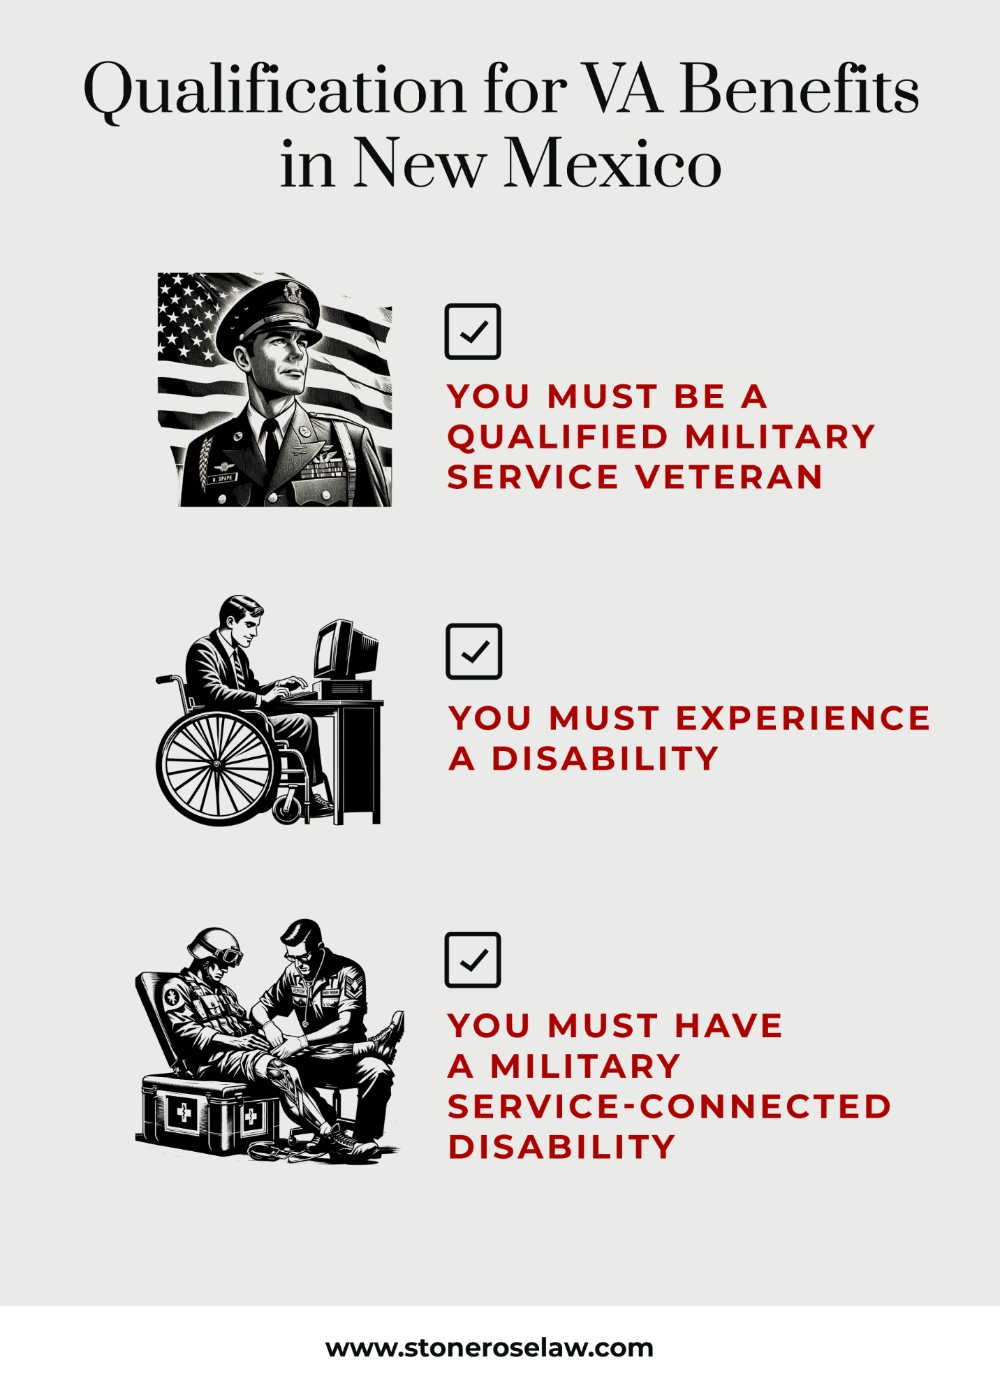 qualifications for VA benefits in New Mexico